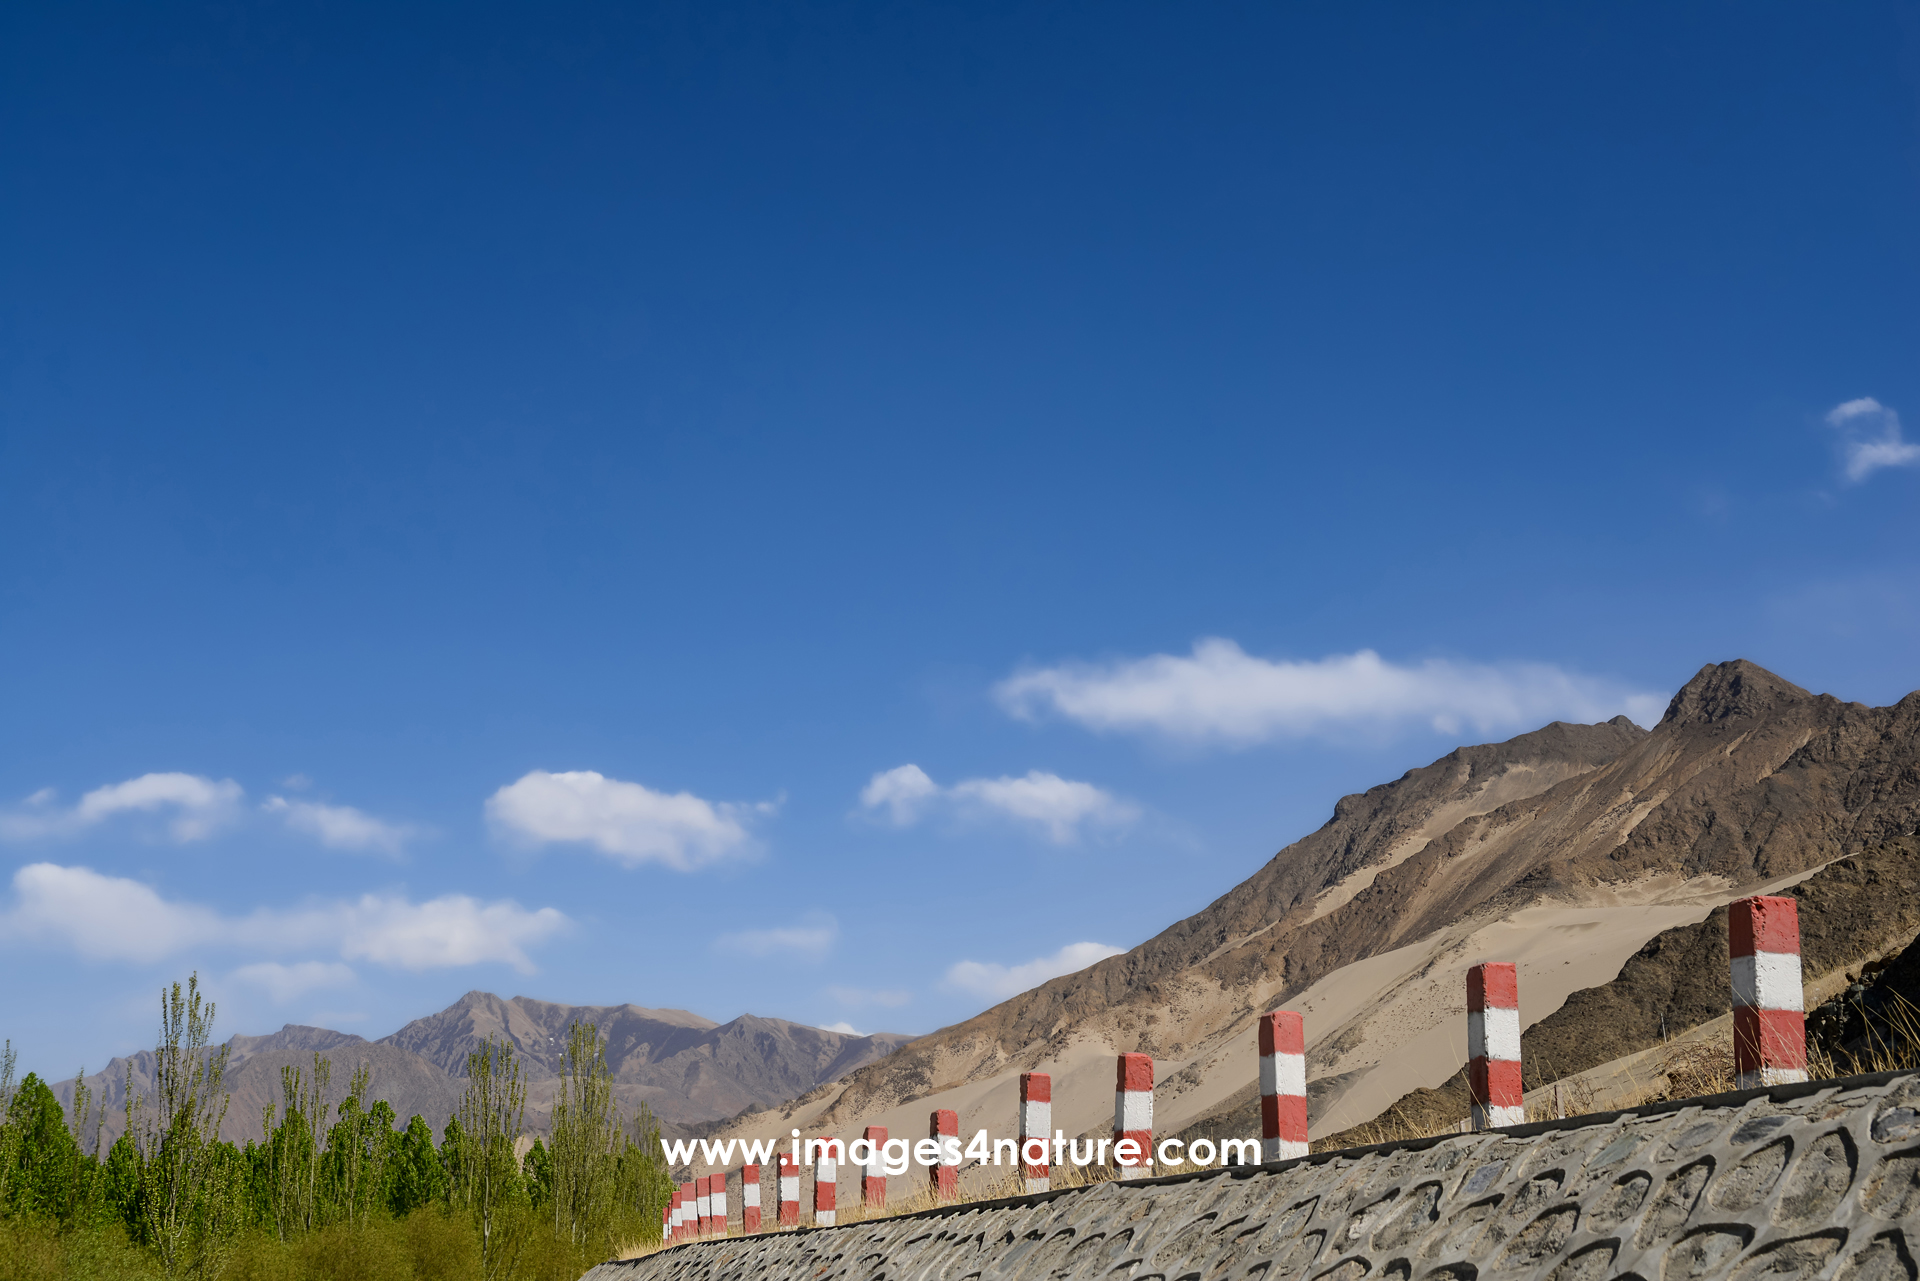 Low-angle view of white and red painted road guiding posts against mountains and blue sky